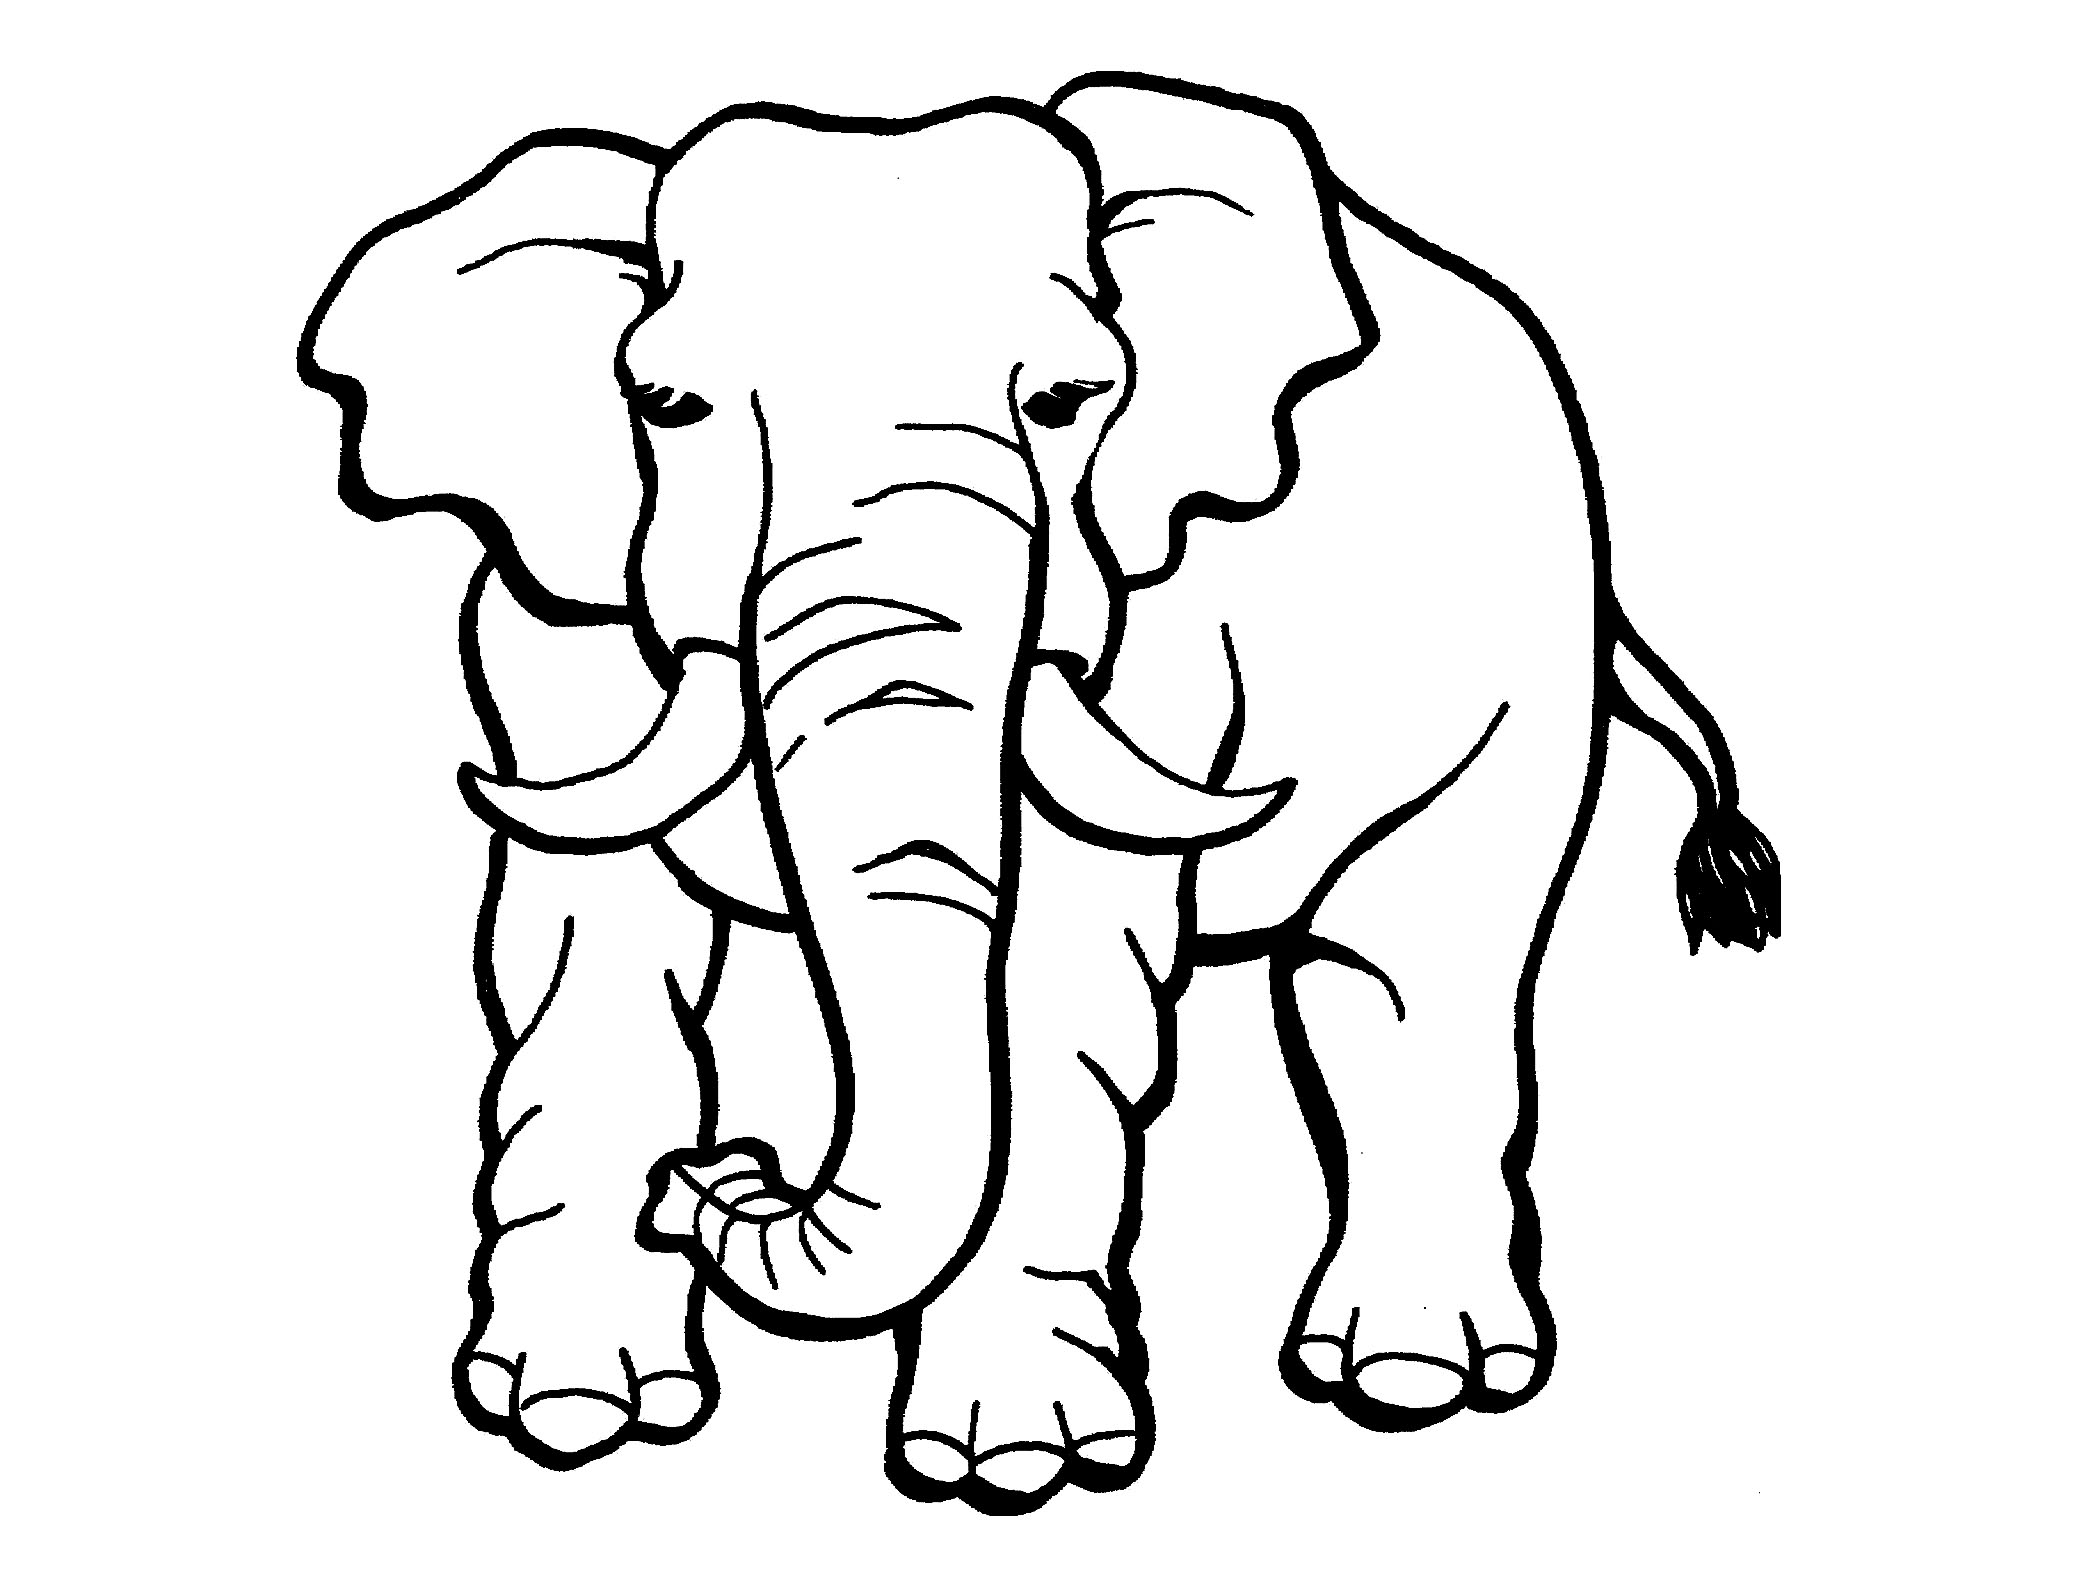 Elephant image to print and color Elephants Kids Coloring Pages